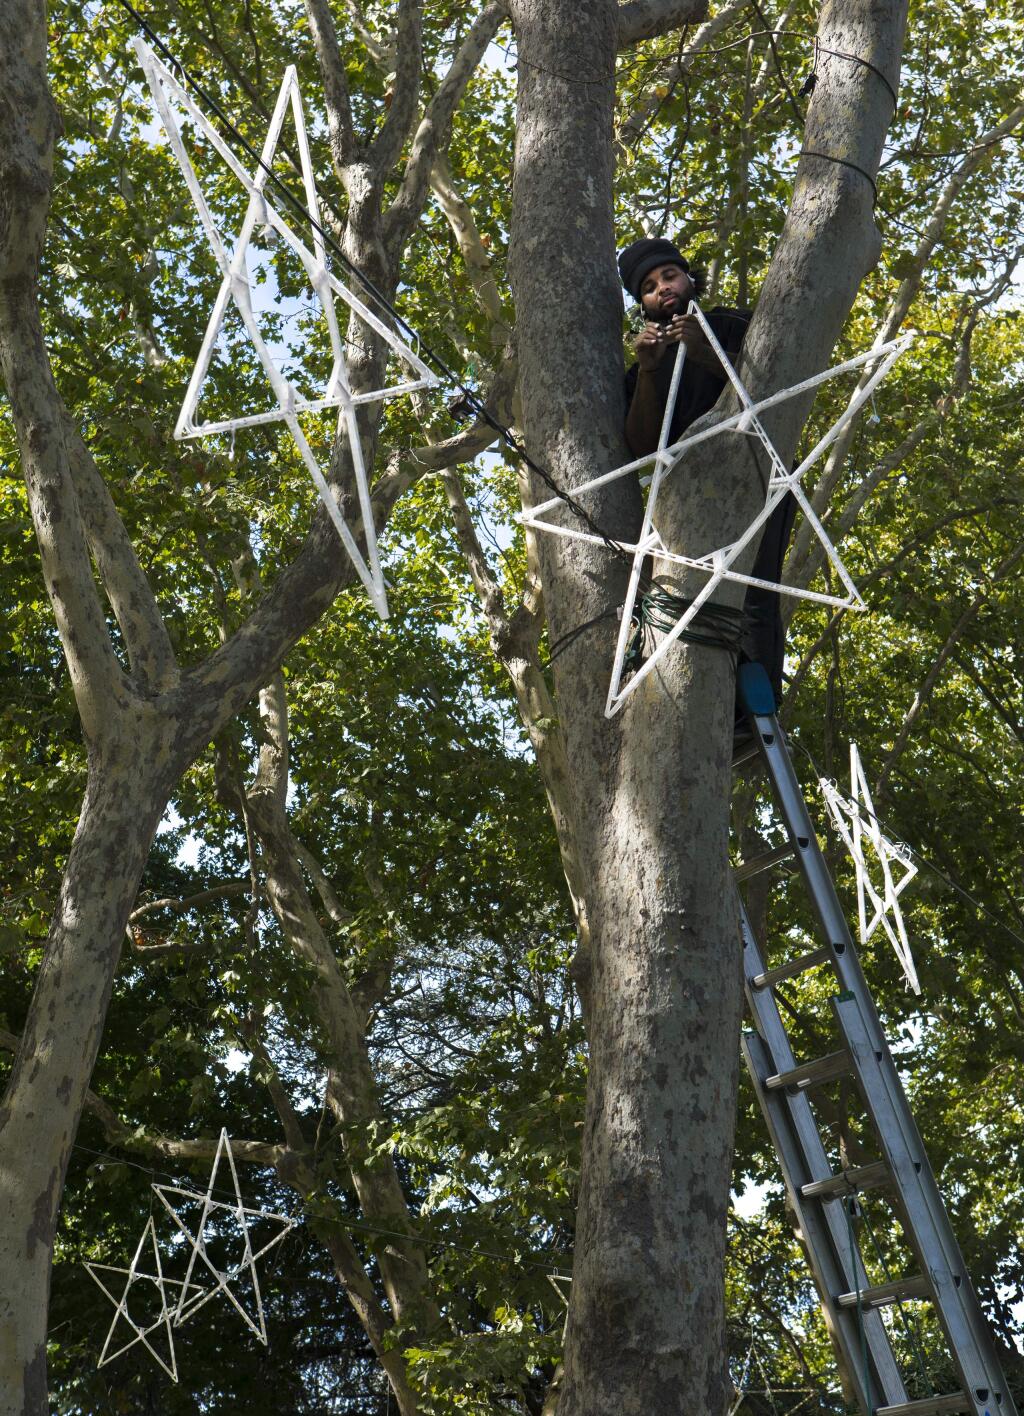 Niqeel Wyndham, of Christmas Lights Pros, hung stars on the Plaza on Thursday, Oct. 24, in preparation for the Plaza Christmas lighting celebration. (Photo by Robbi Pengelly/Index-Tribune)